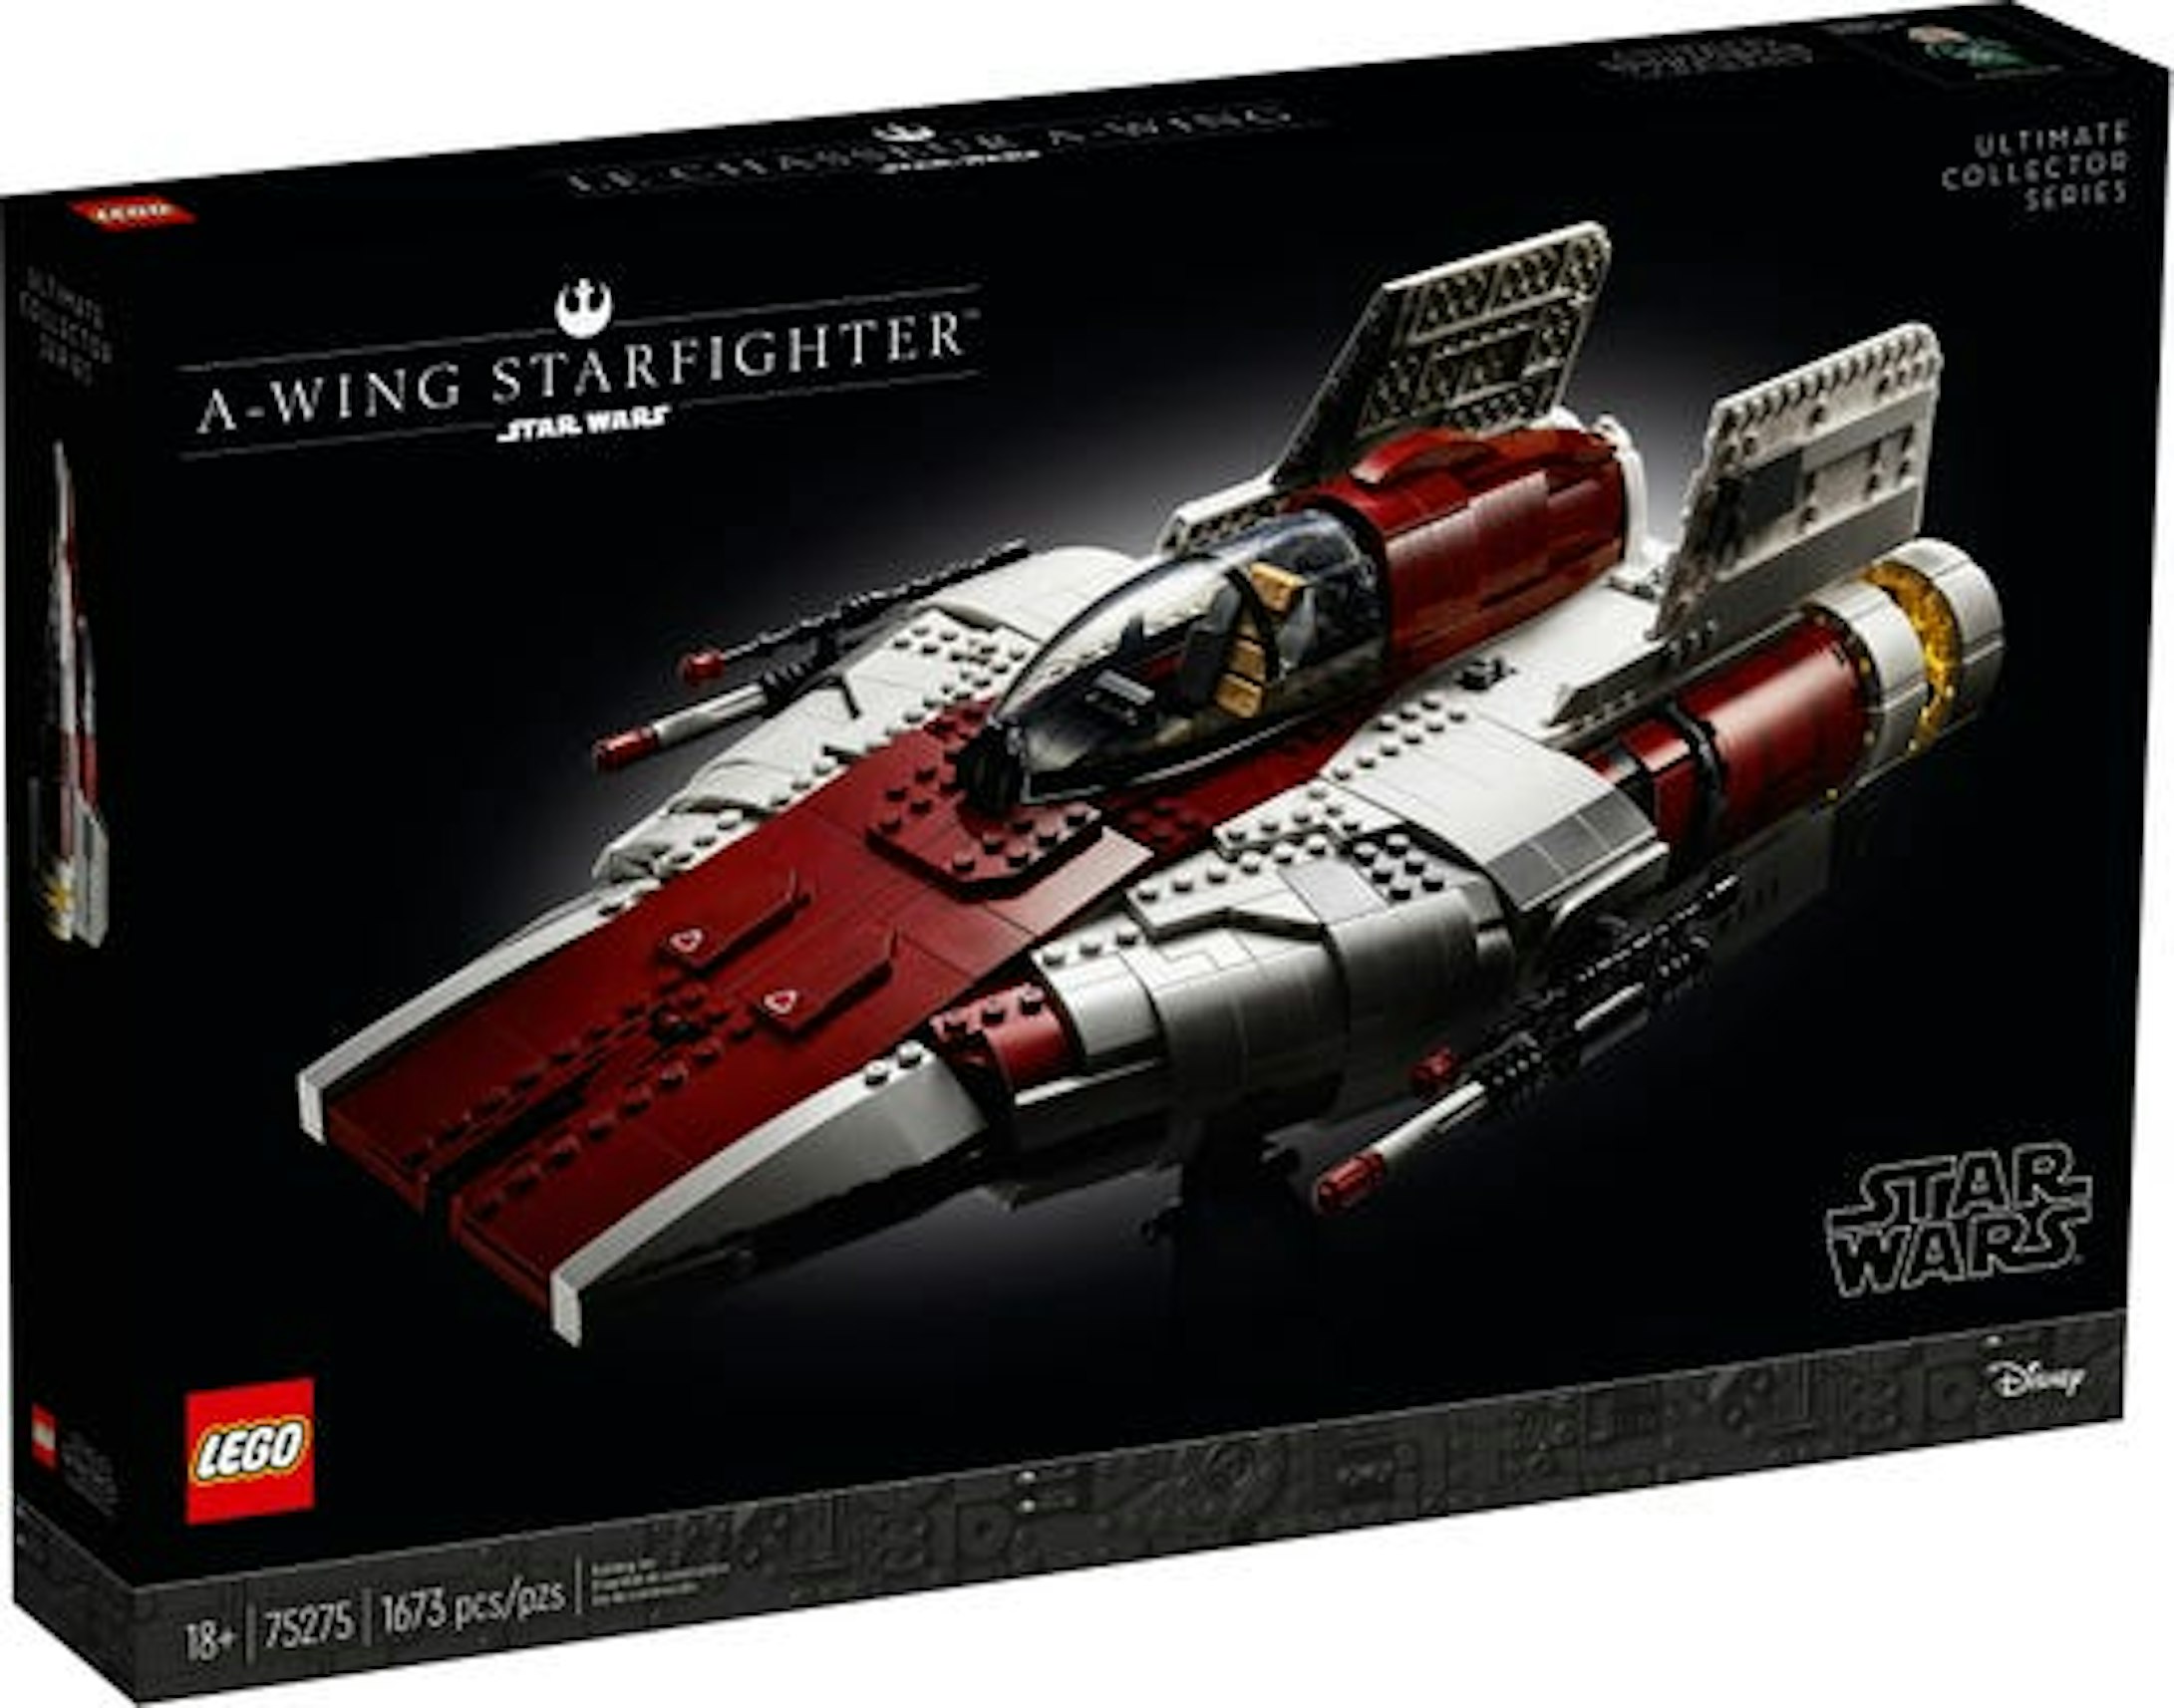 LEGO Star Wars Ultimate Collector Series A-Wing Starfighter Set 75275 US